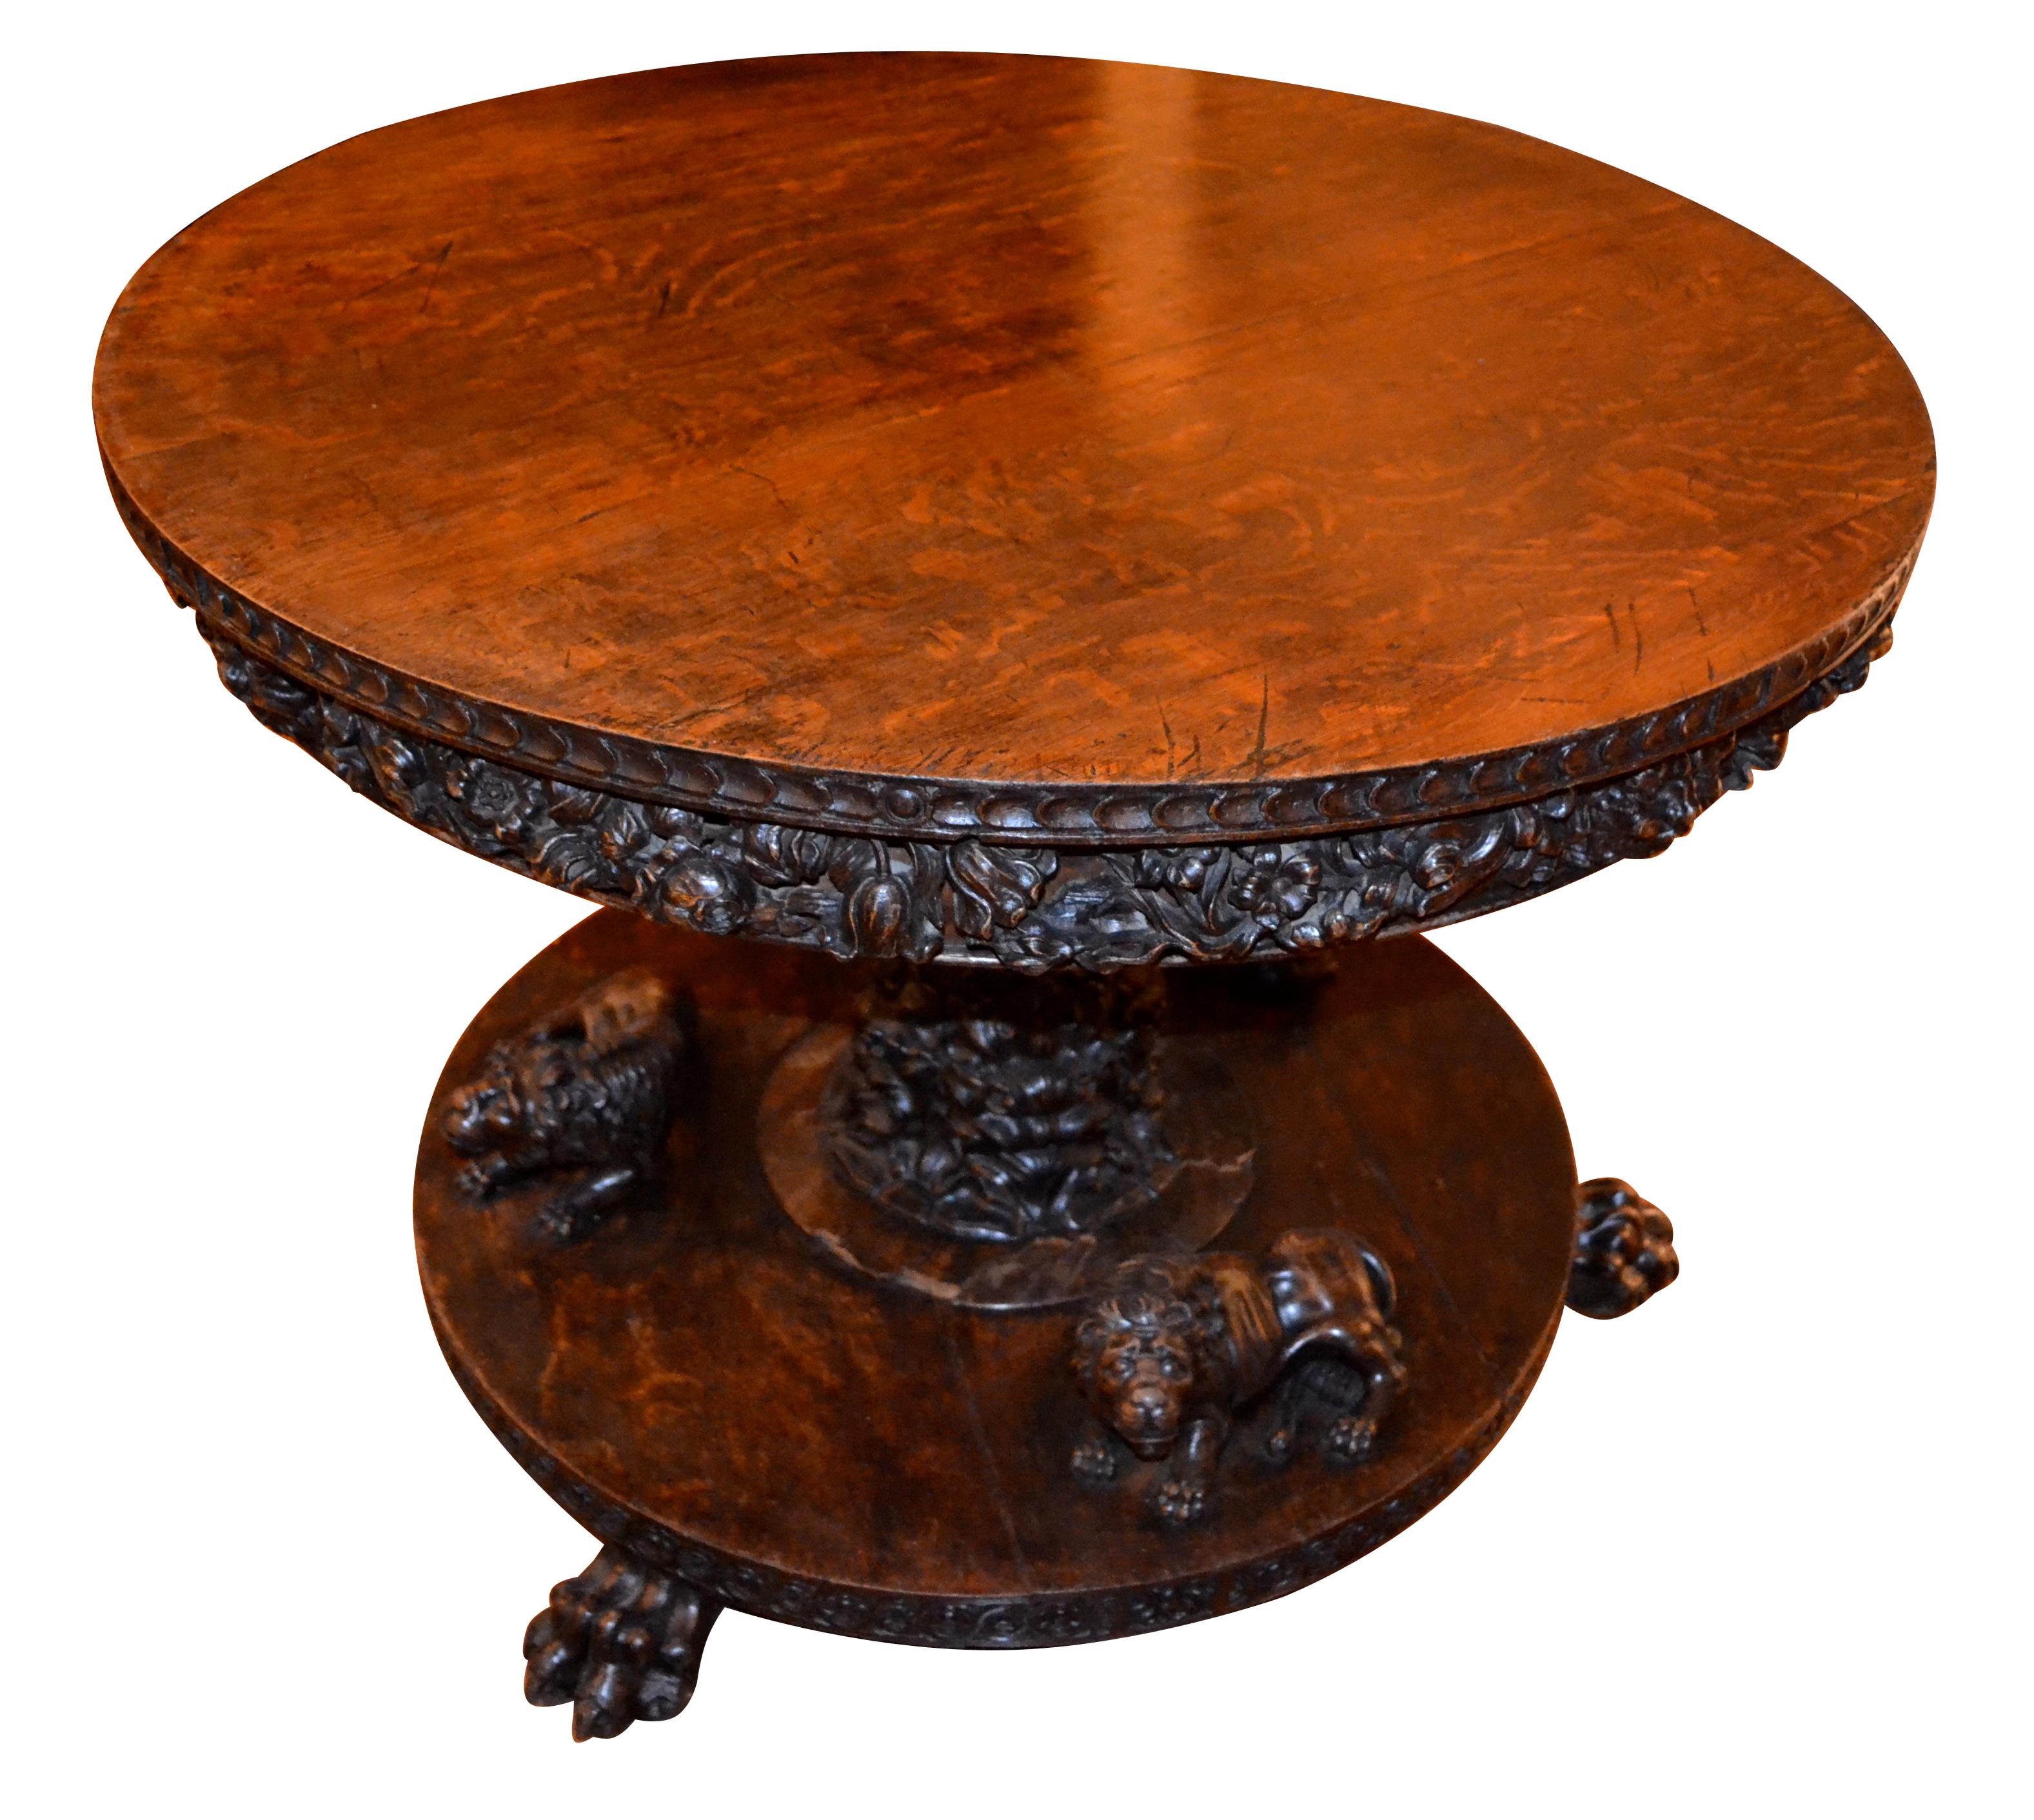 A heavily carved stained oak centre table in the Renaissance Revival style. The round top has a wide apron entirely carved with grotesque masks and ‘organic’ decoration; the underside of the top is also heavily carved, (see photos). The top is